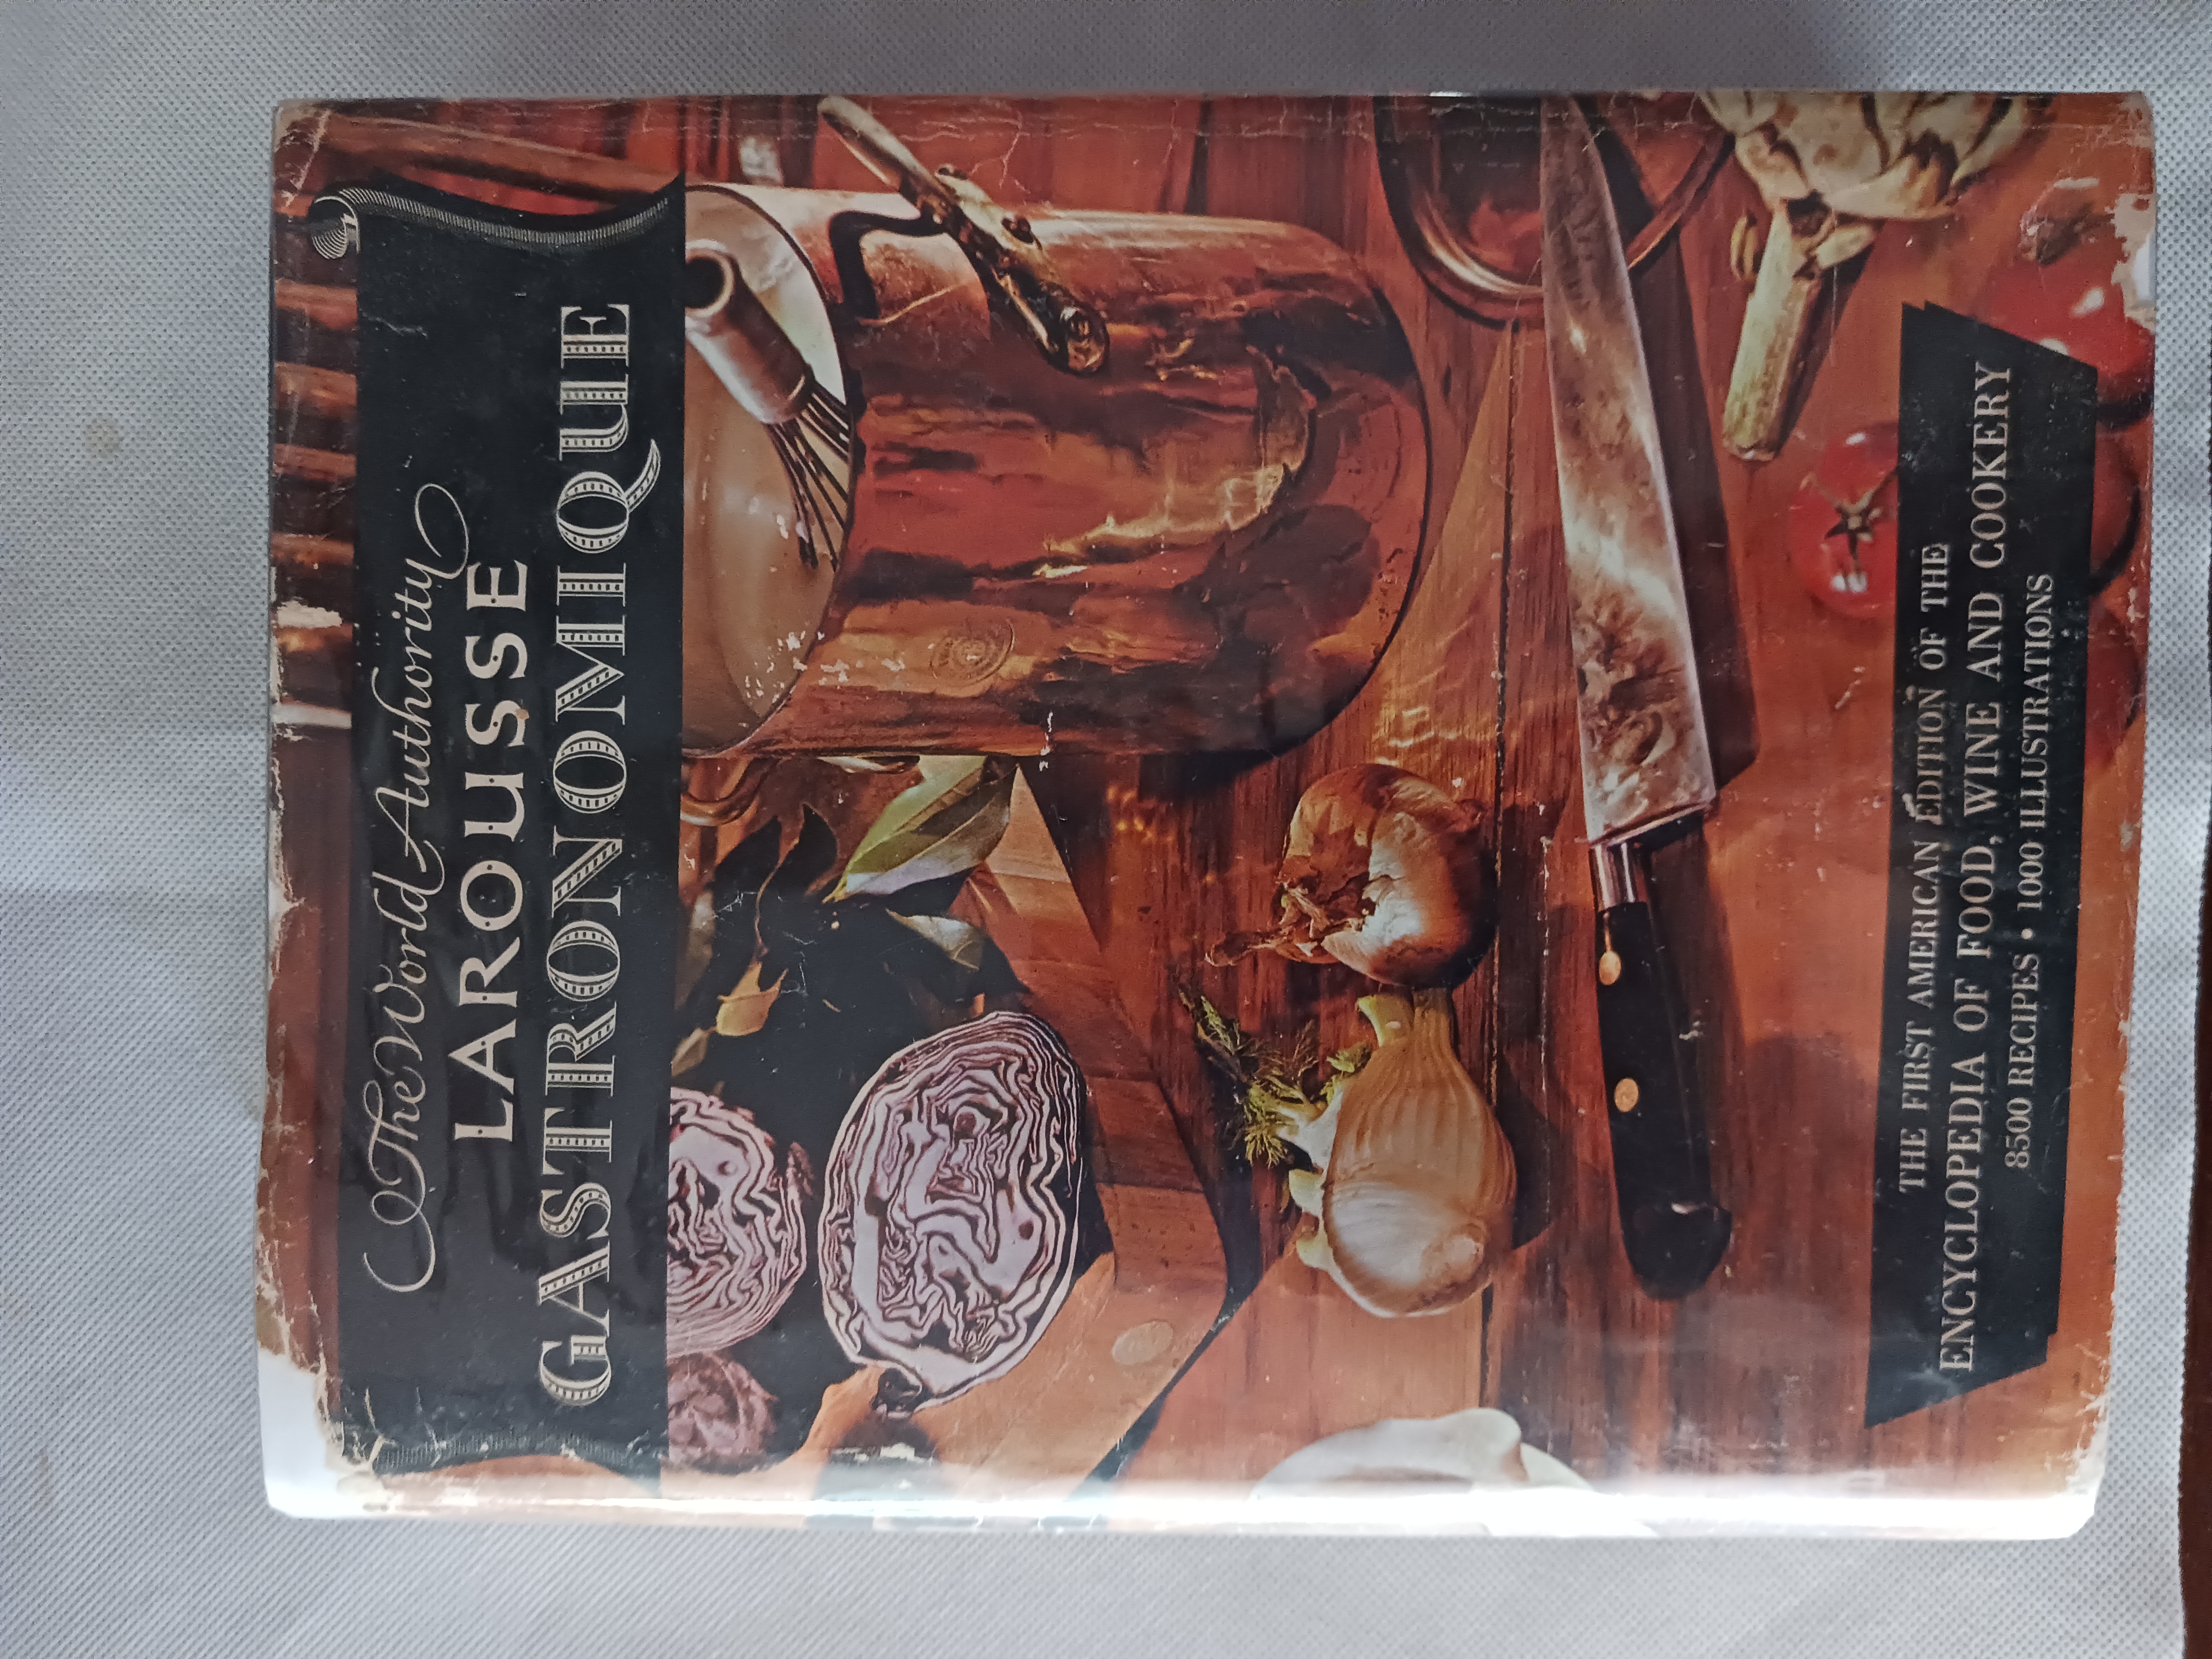 Larousse Gastronomique: The Encyclopedia of Food, Wine & Cookery